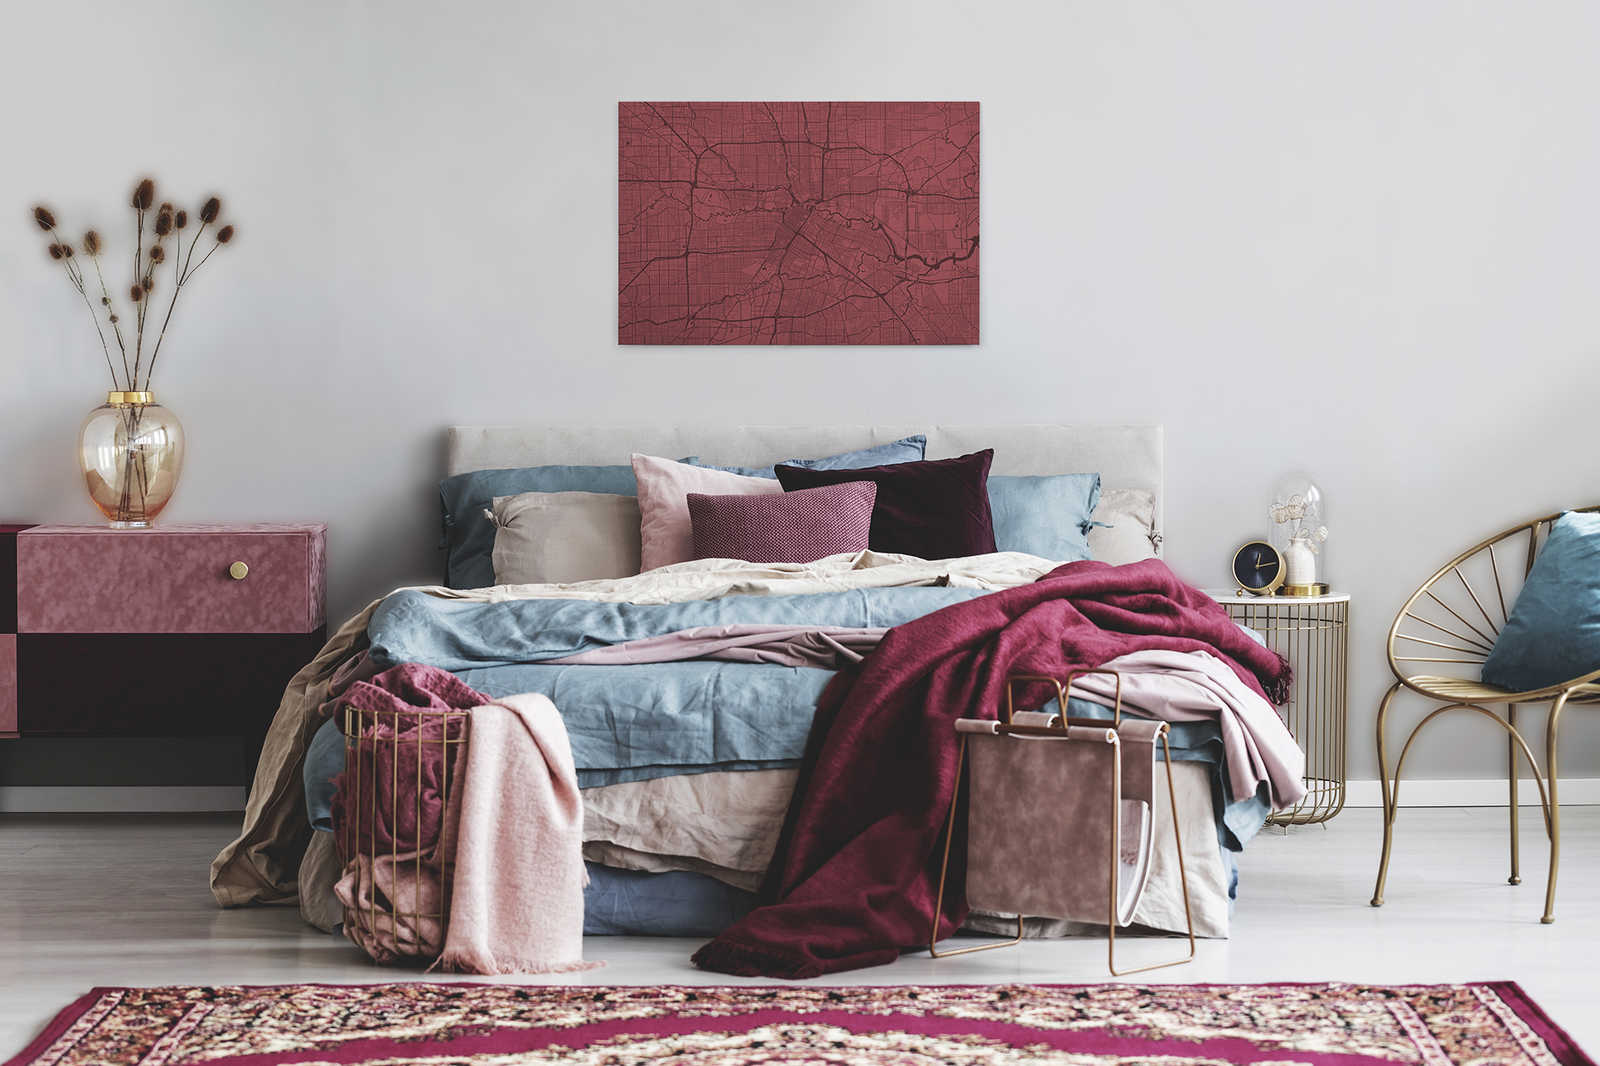             Canvas painting City Map with Street Course | red - 0,90 m x 0,60 m
        